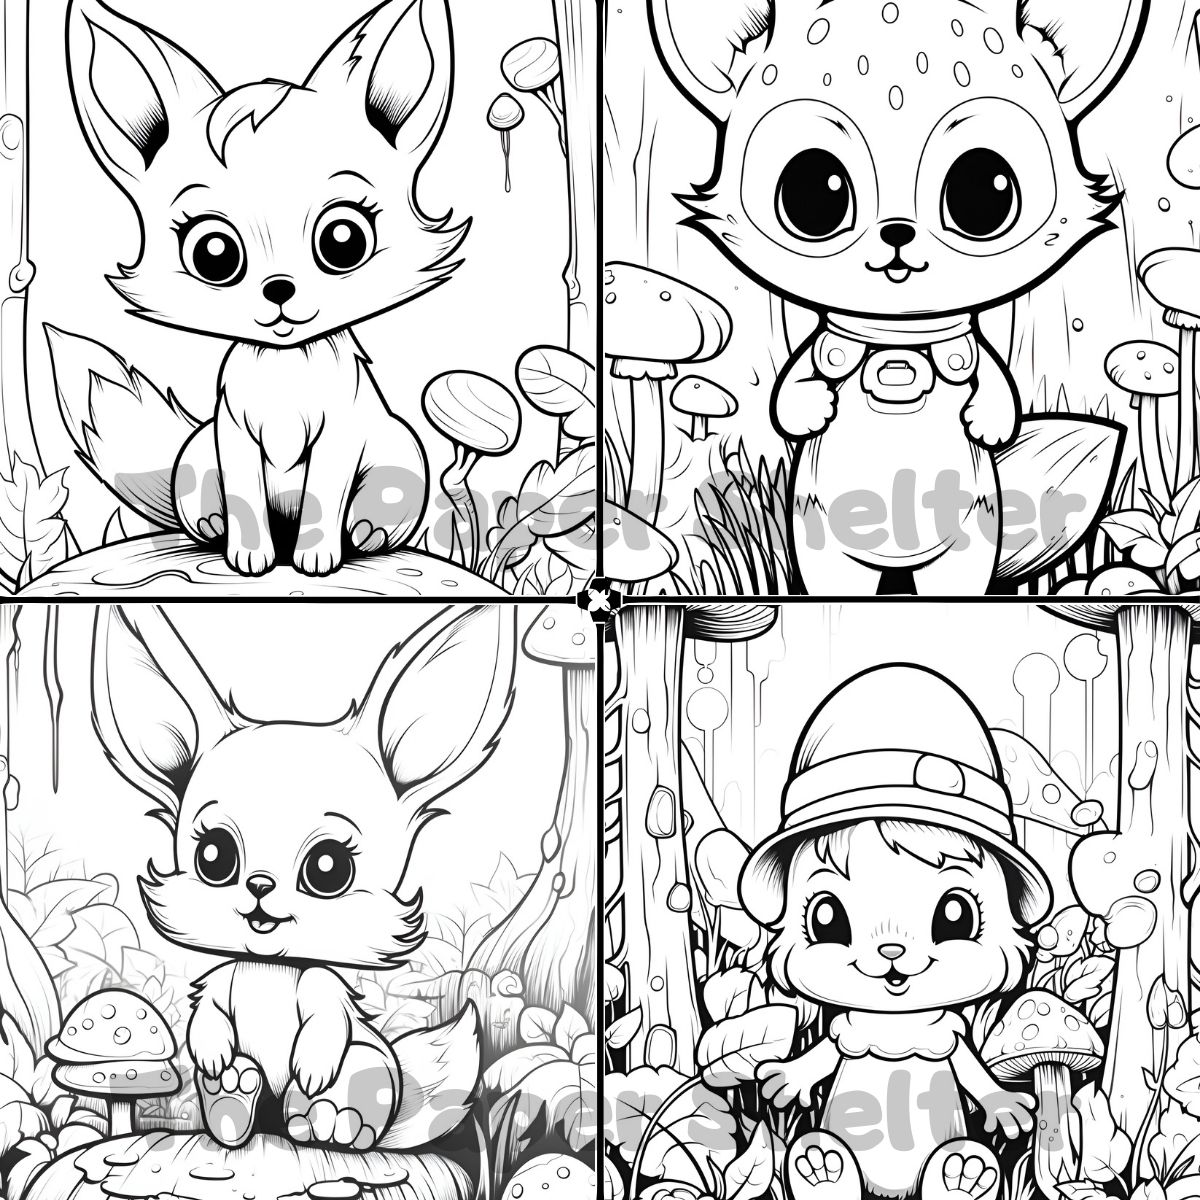 Forest Cute Baby Animals - Digital Coloring Book - Click Image to Close